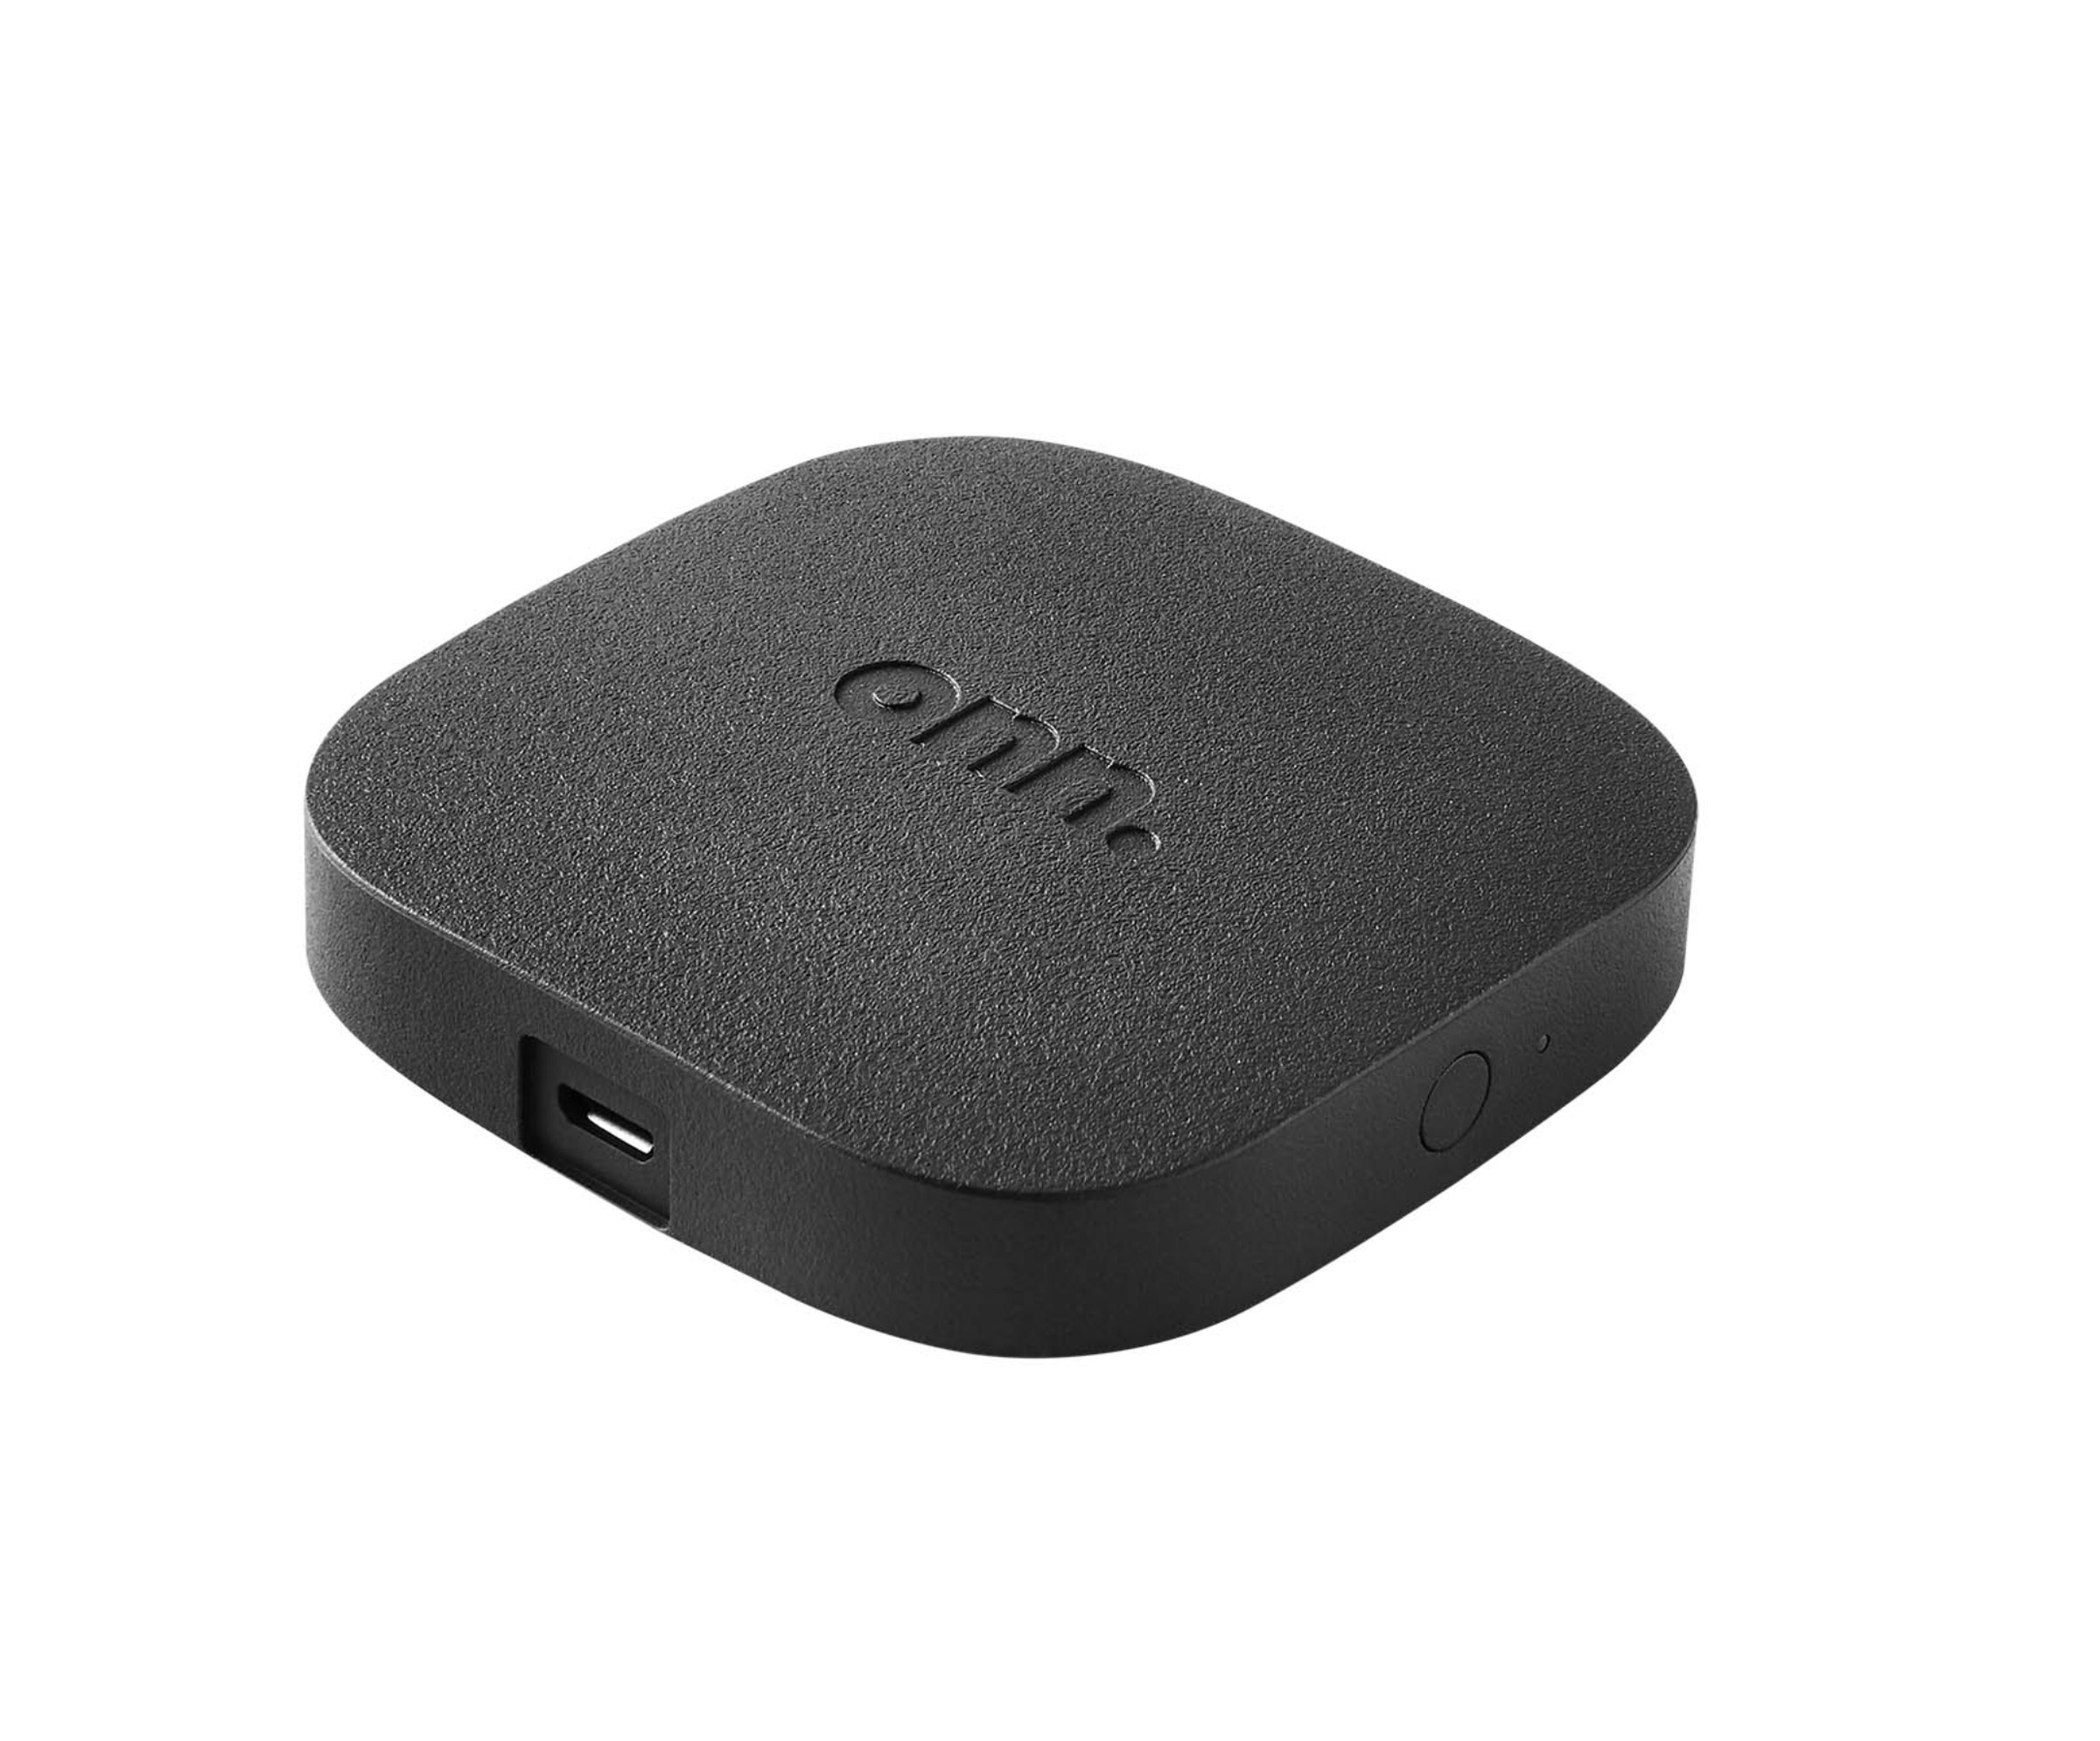 Walmart’s streaming device is a fairly unassuming black square.